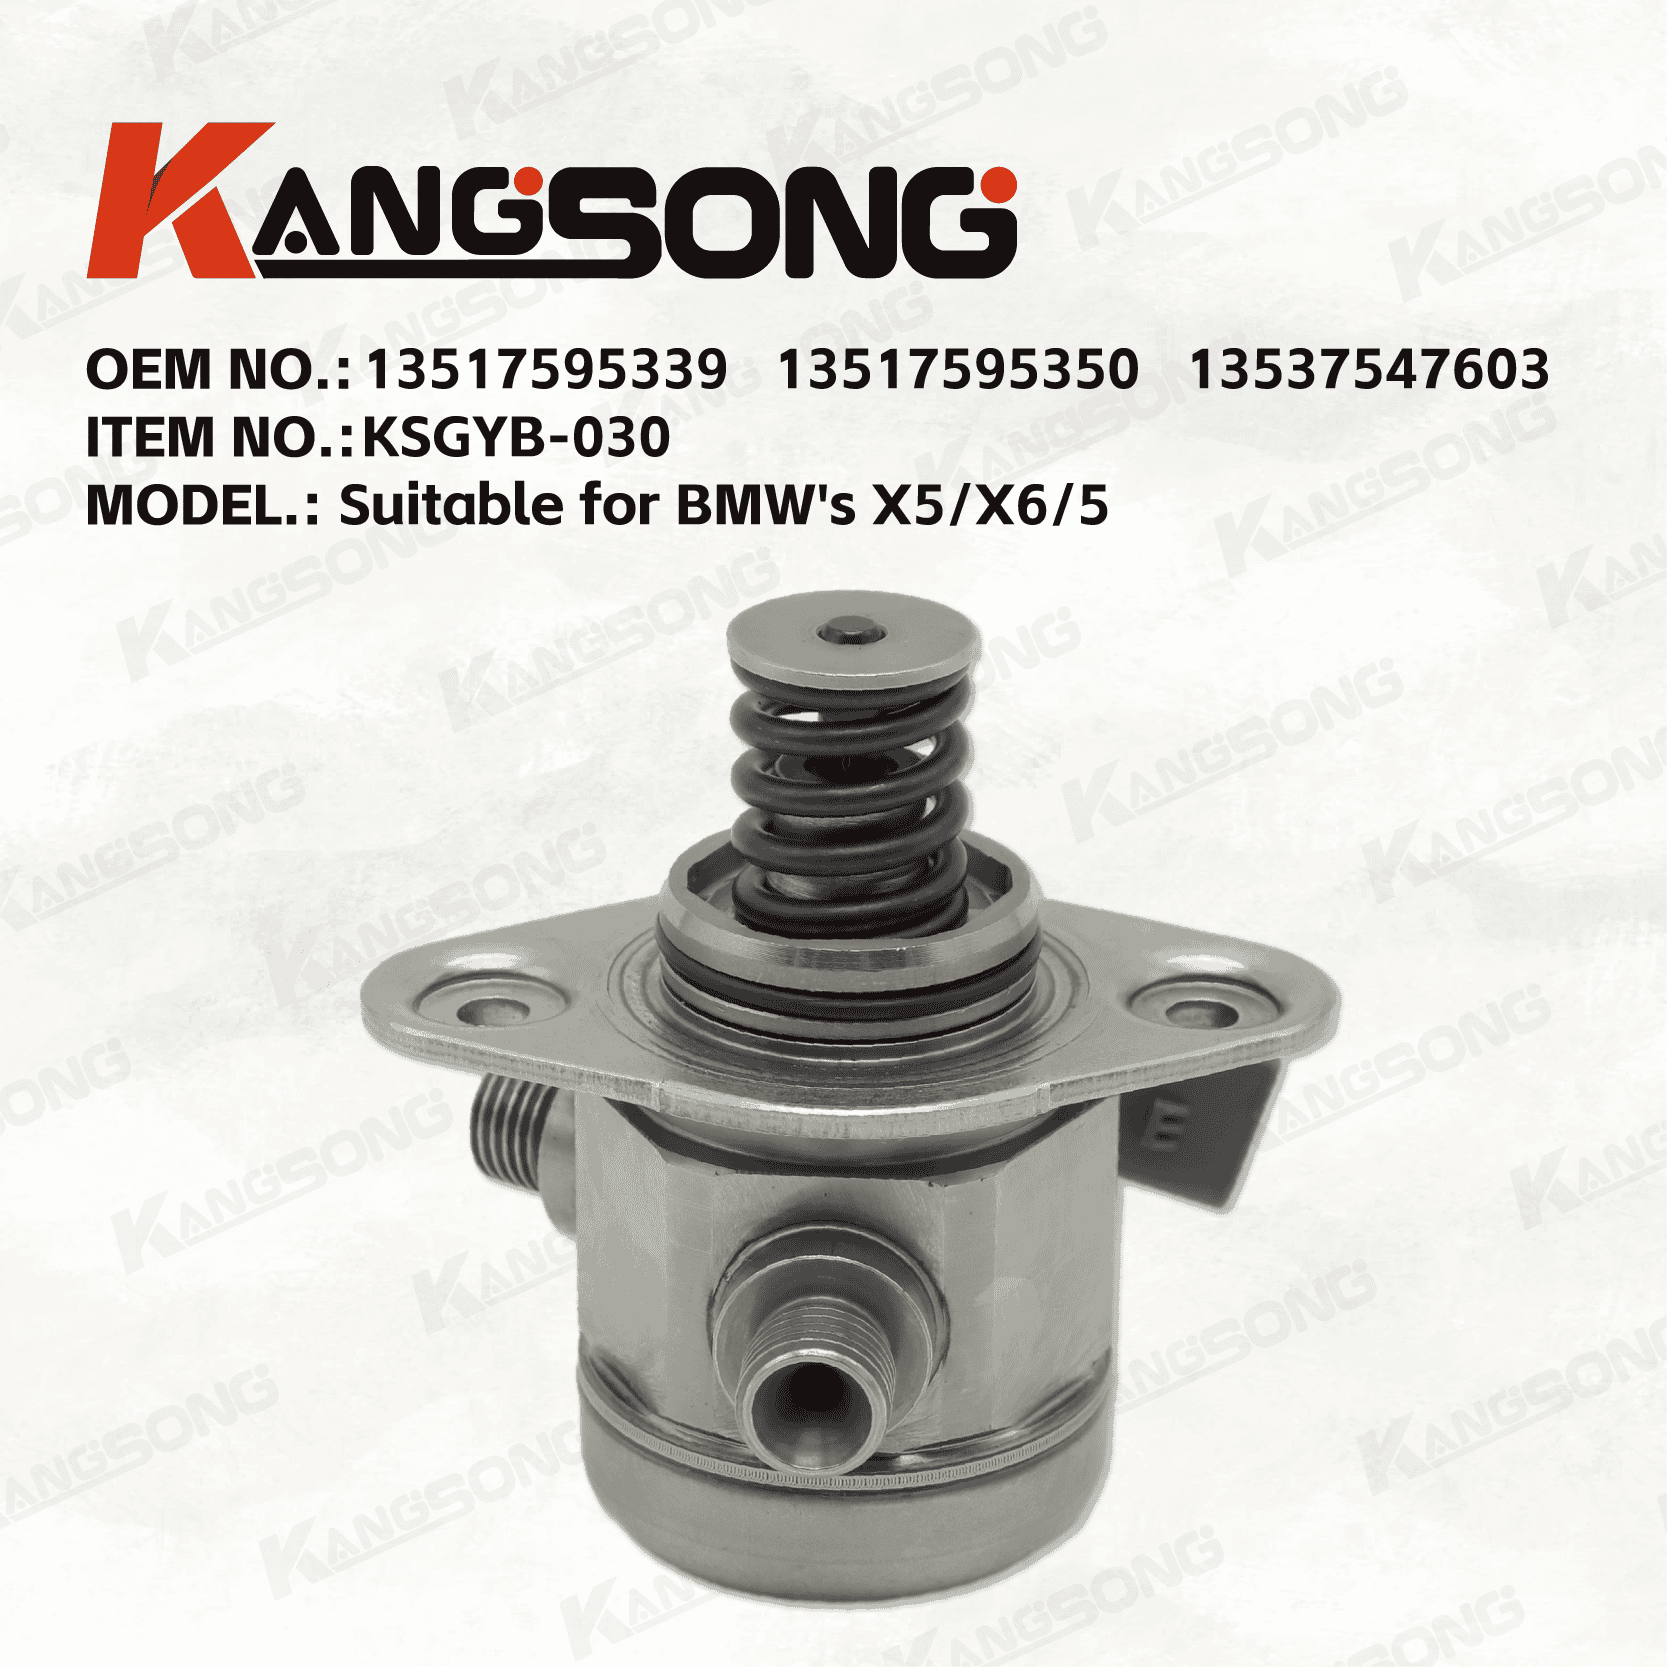 Applicable to BMW/13517595339 13517595350 13537547603/High pressure fuel pump/KSGYB-031